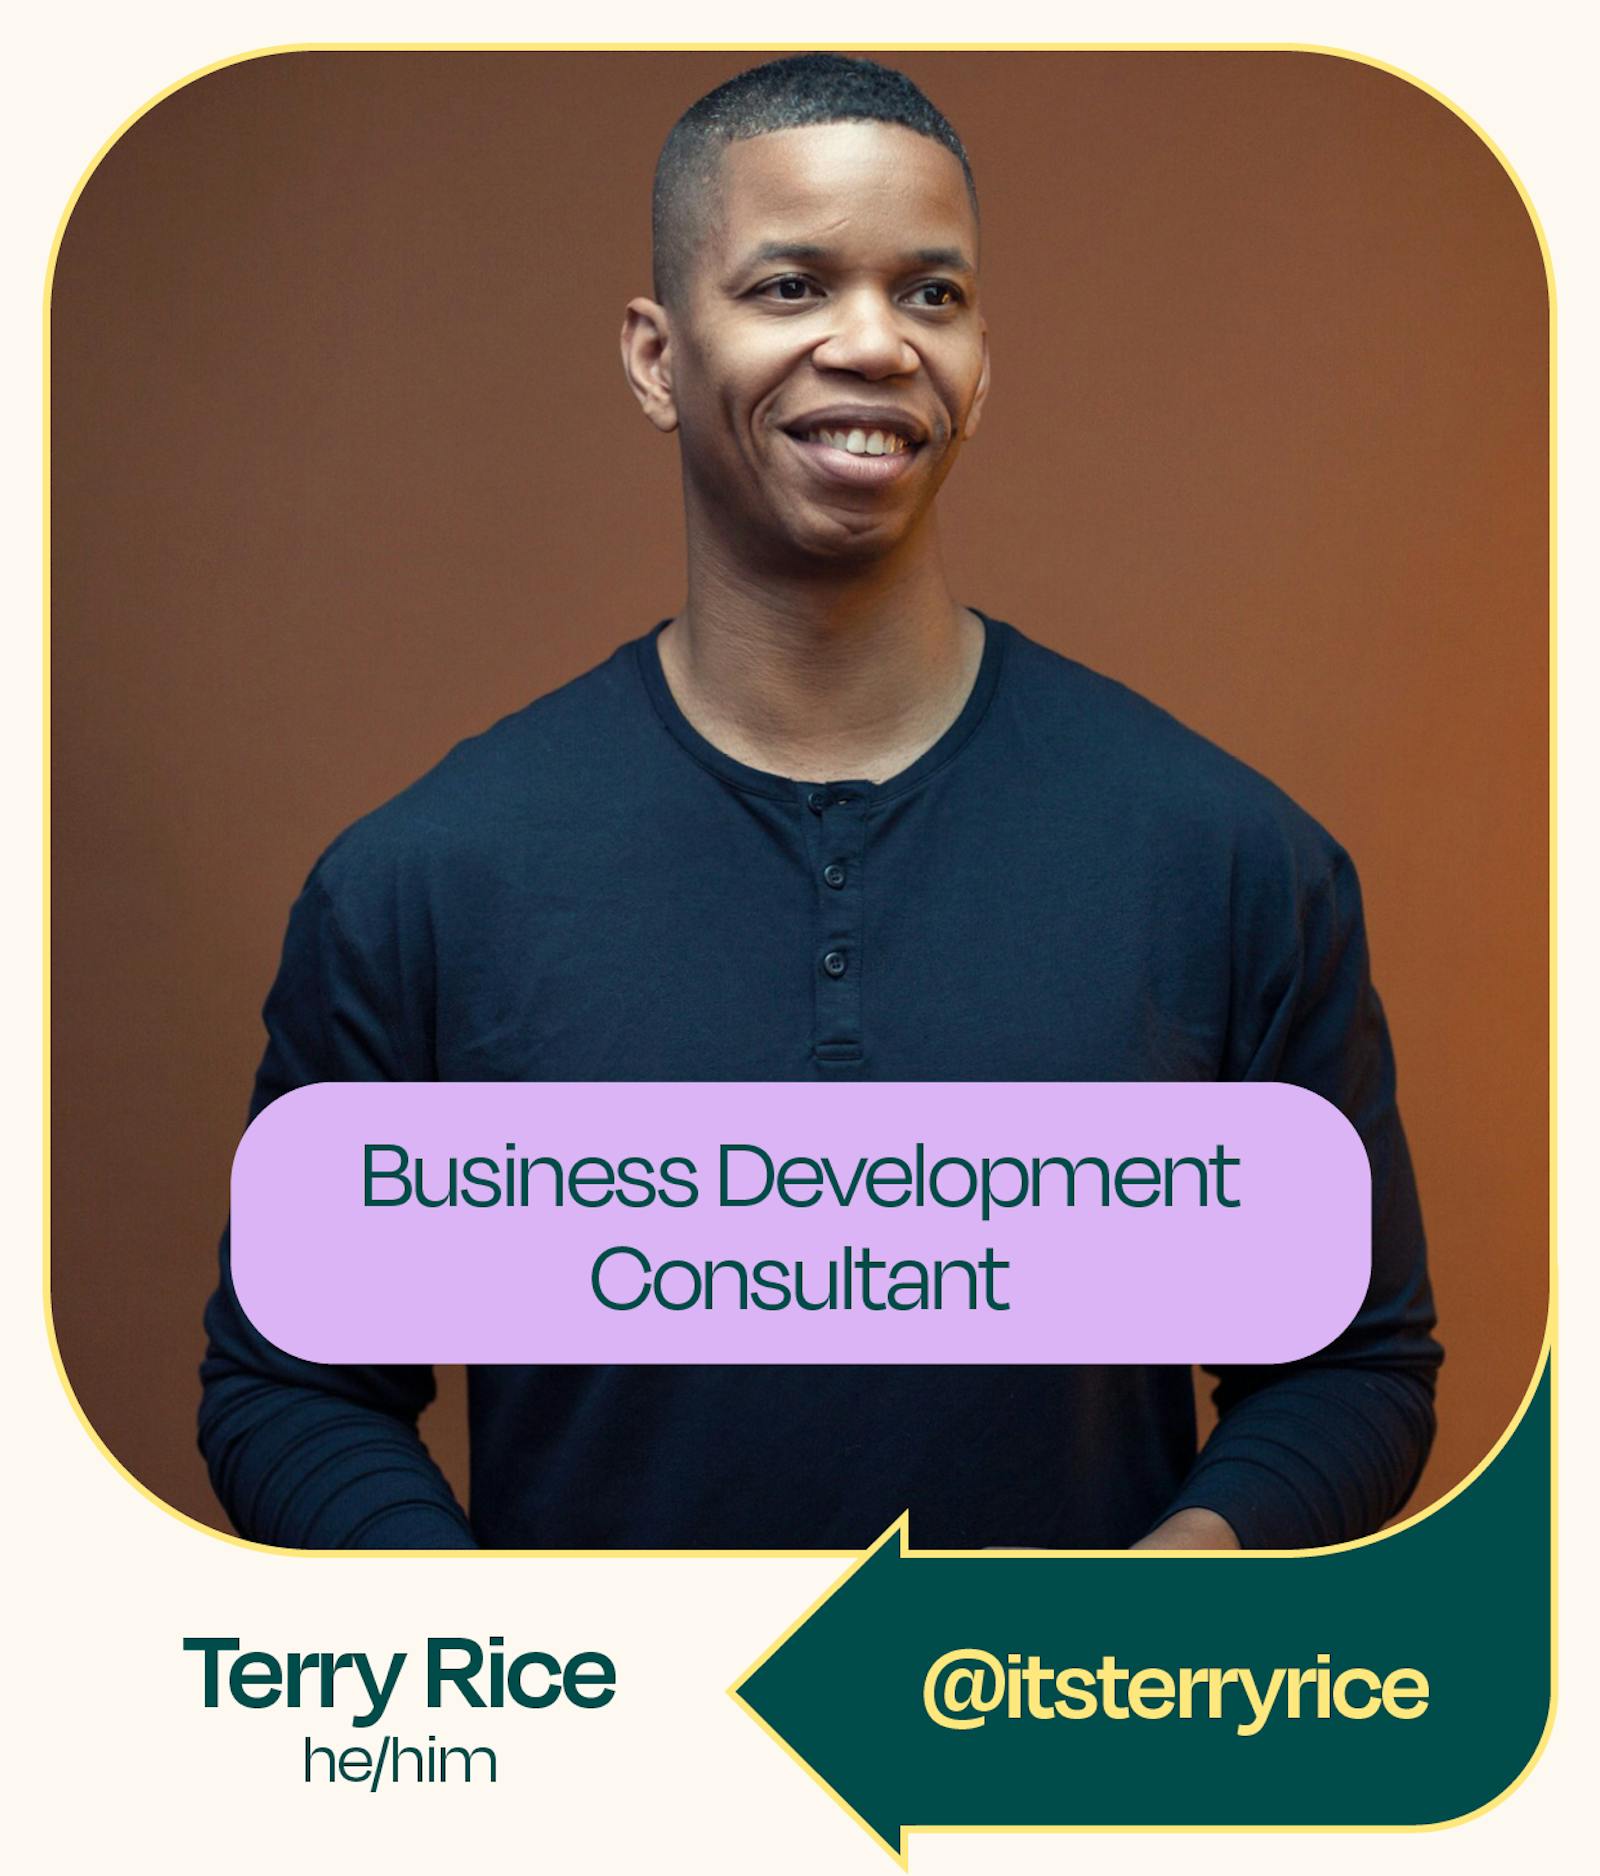 MEET TERRY RICE & SIGN UP FOR HIS COURSE